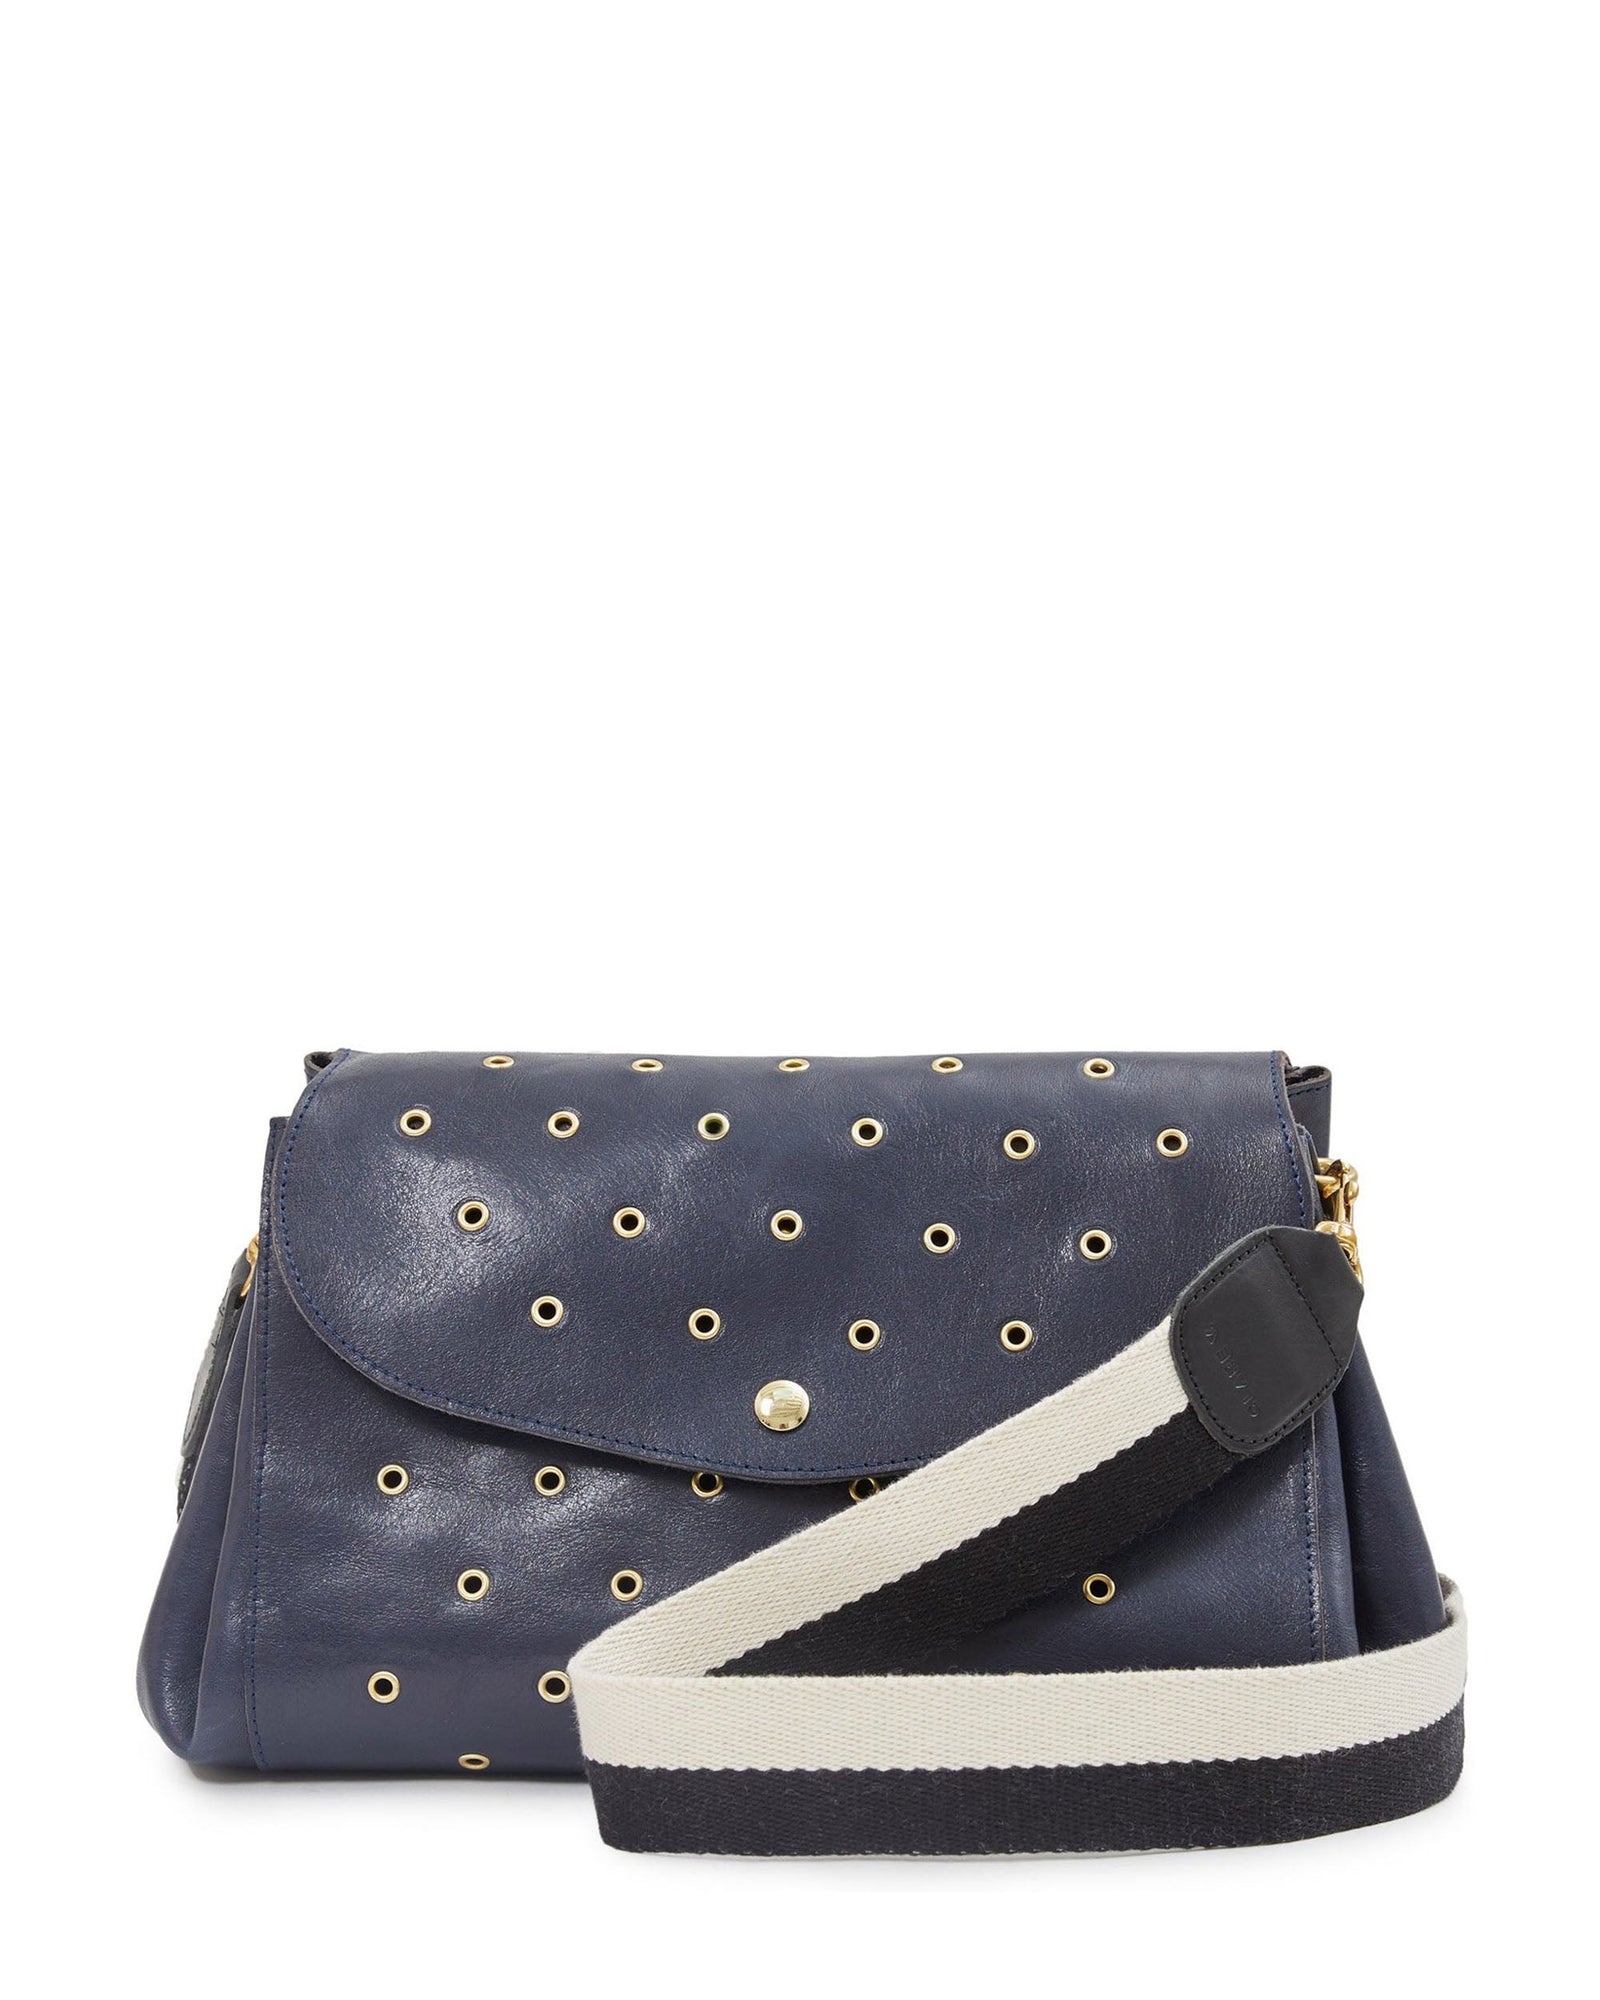 Navy Rustic with Grommets Arabelle Bag with Black & White Cotton Webbing Crossbody Strap